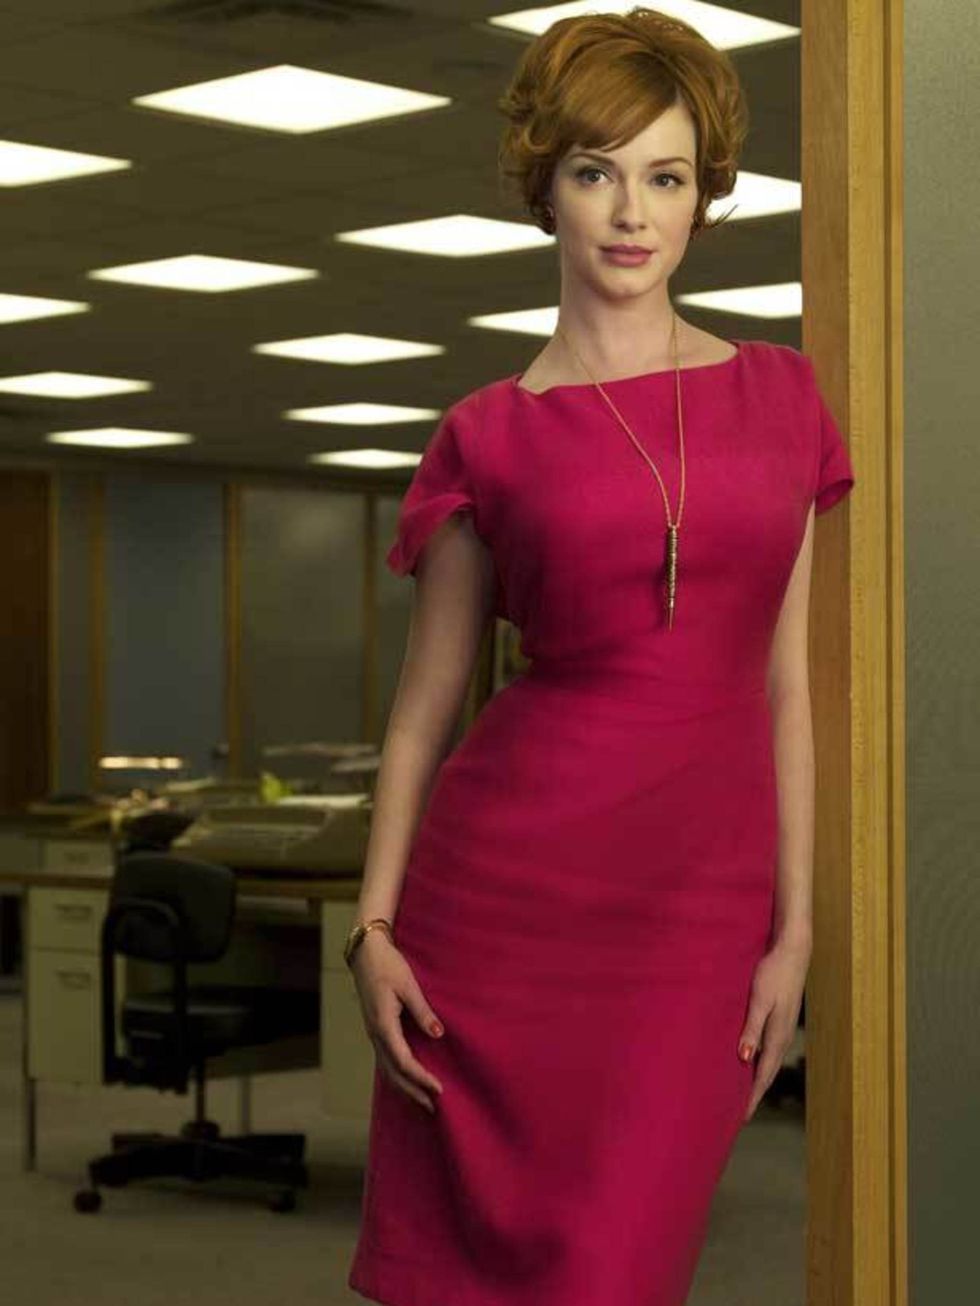 <p>It's all about the hourglass silouette for <a href="http://www.elleuk.com/content/search?SearchText=christina+hendricks&amp;SearchButton=Search">Christina Hendricks</a>' charcater Joan Harris in <a href="http://www.elleuk.com/content/search?SearchText=